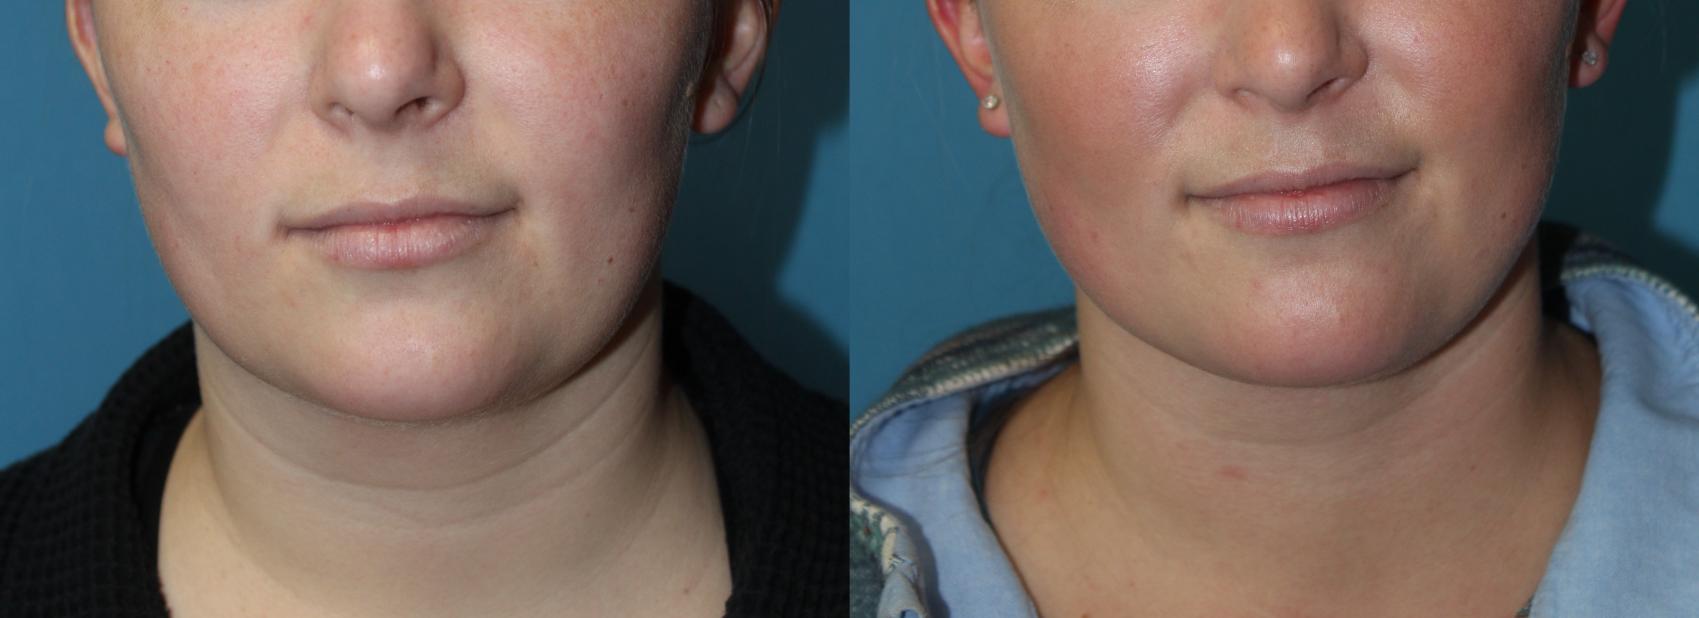 Before & After Liposuction - Neck / Precision TX Face & Neck Case 169 Front View in Coeur d'Alene, ID